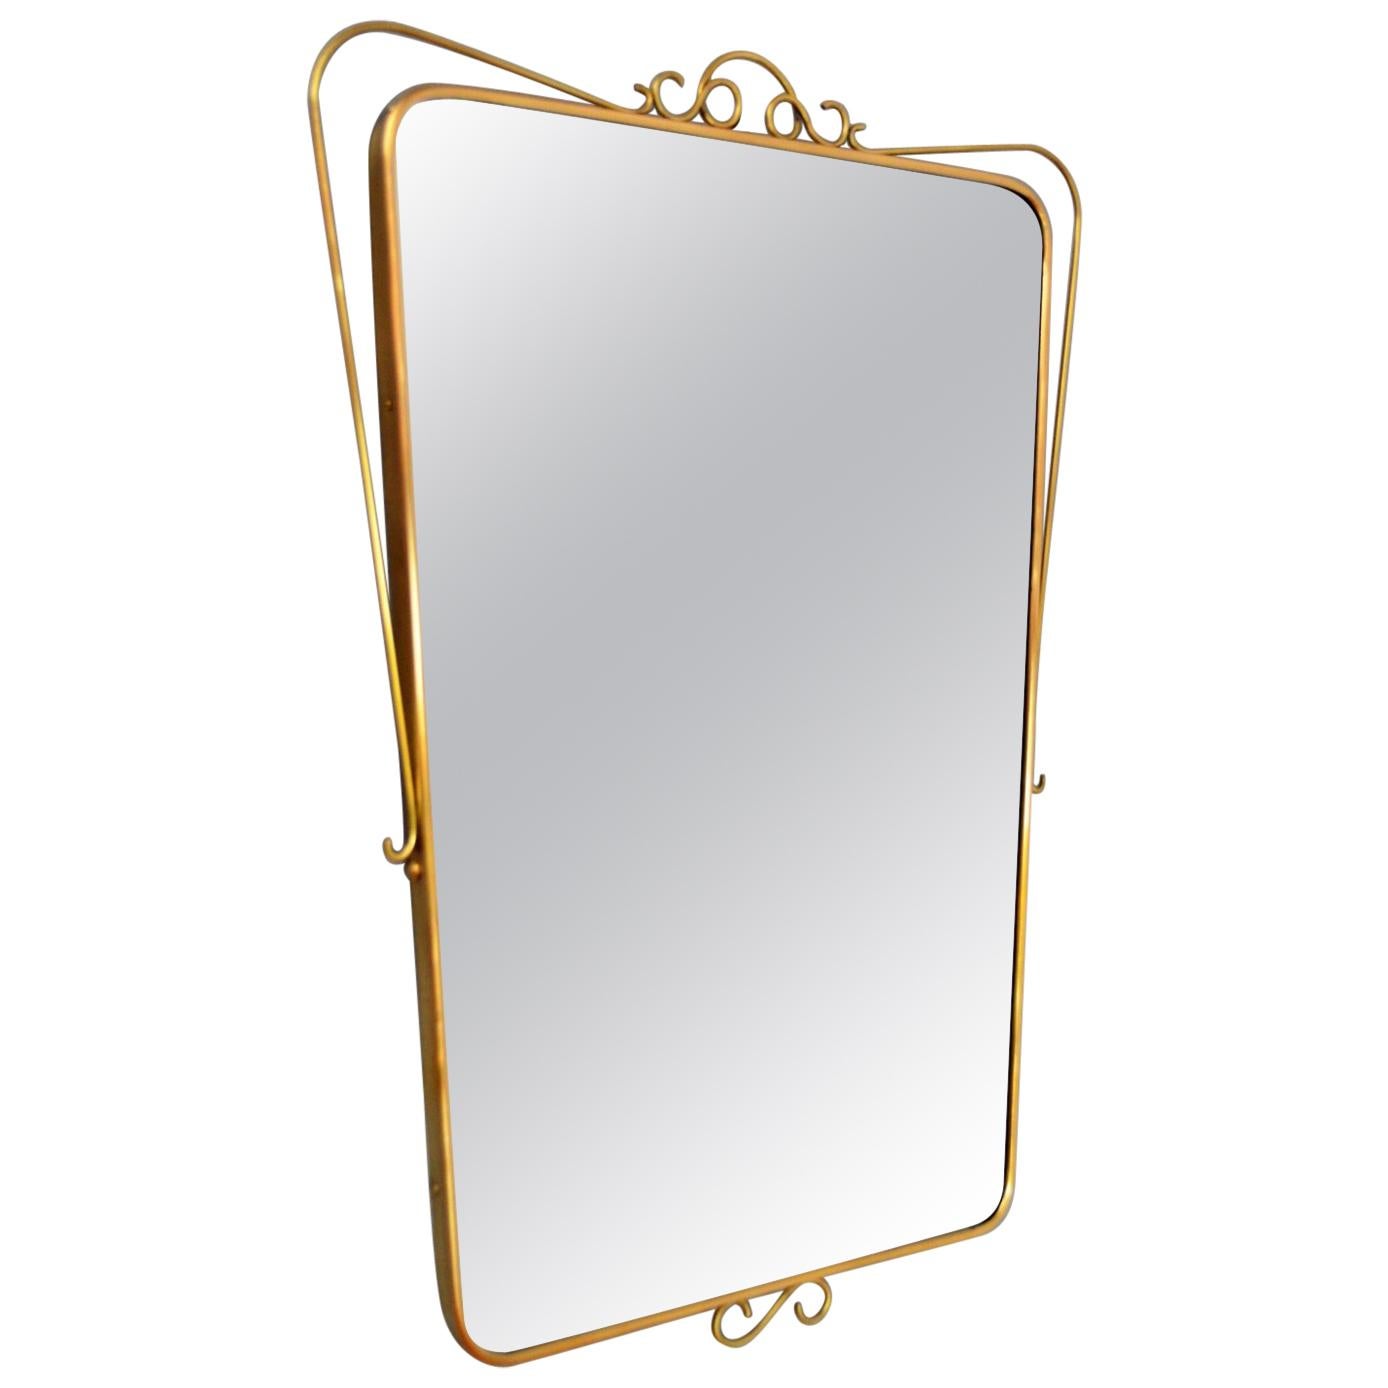 Italian Midcentury Wall Mirror with Brass Frame and Decor, 1950s